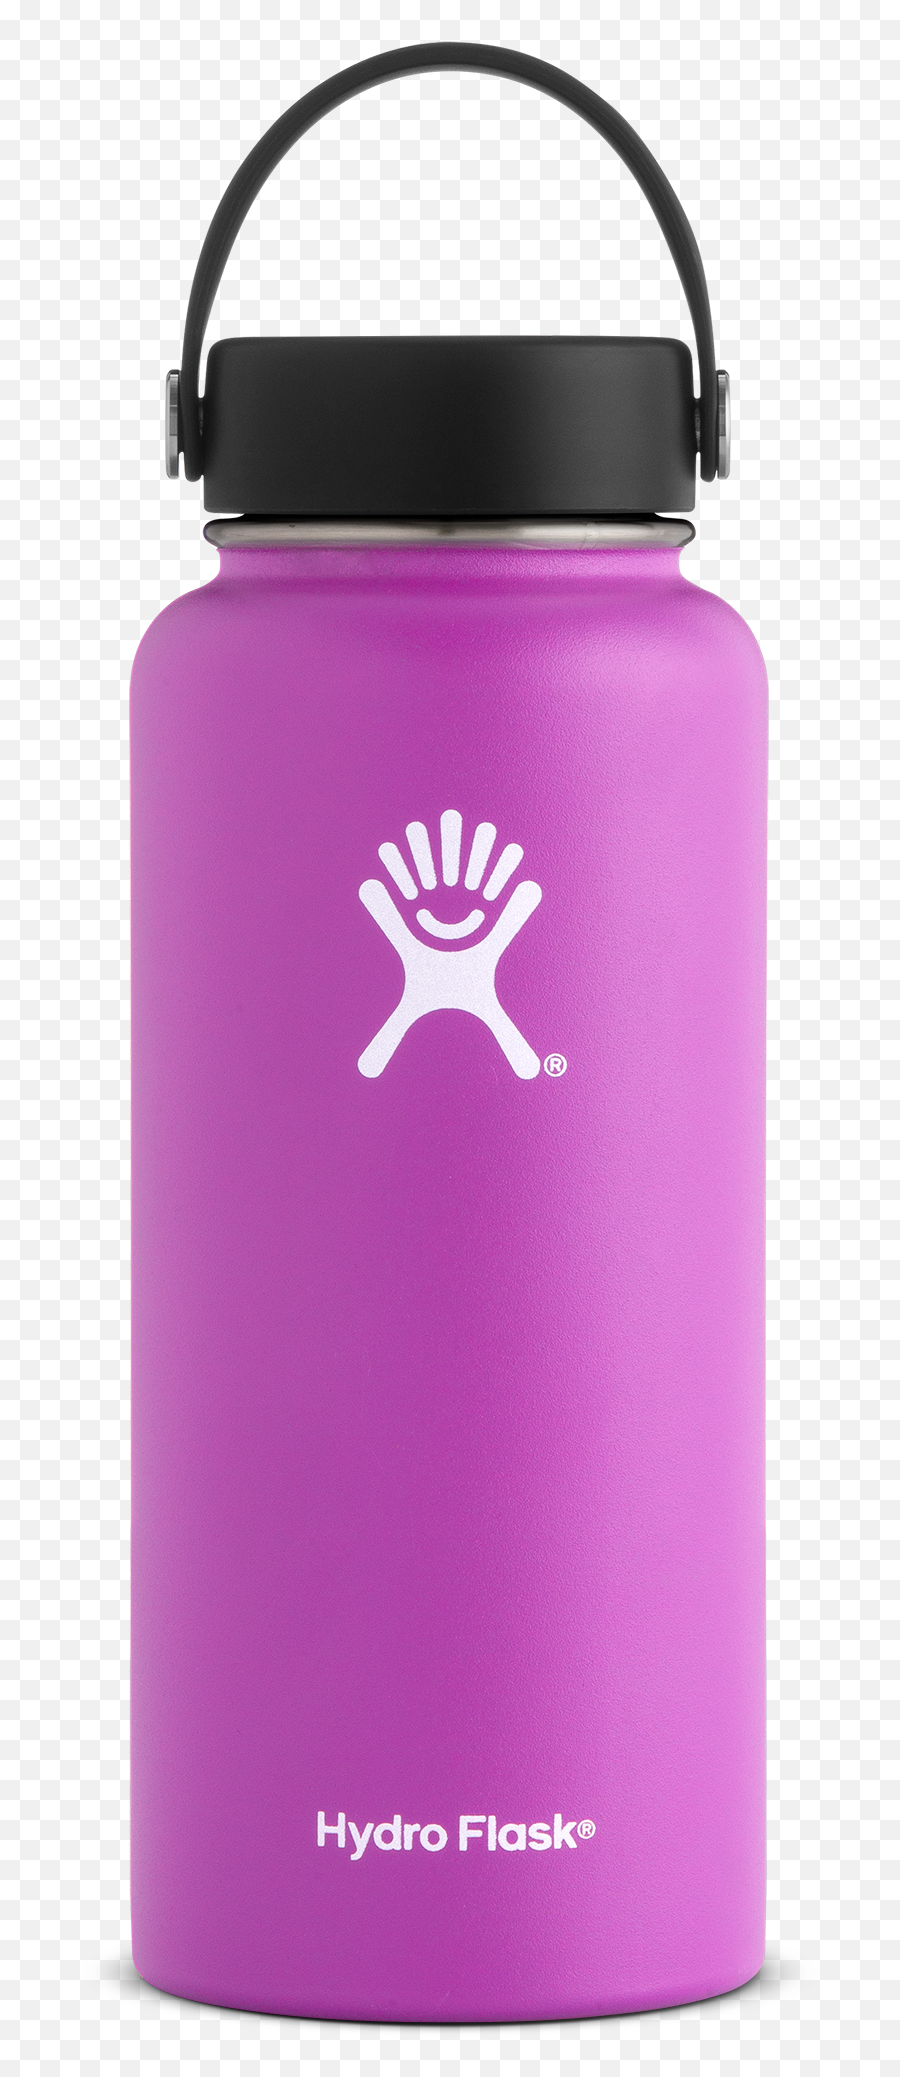 Hydro Flask - Grind Online Store Hydro Flask Dark Purple Png,Hydro Flask Png